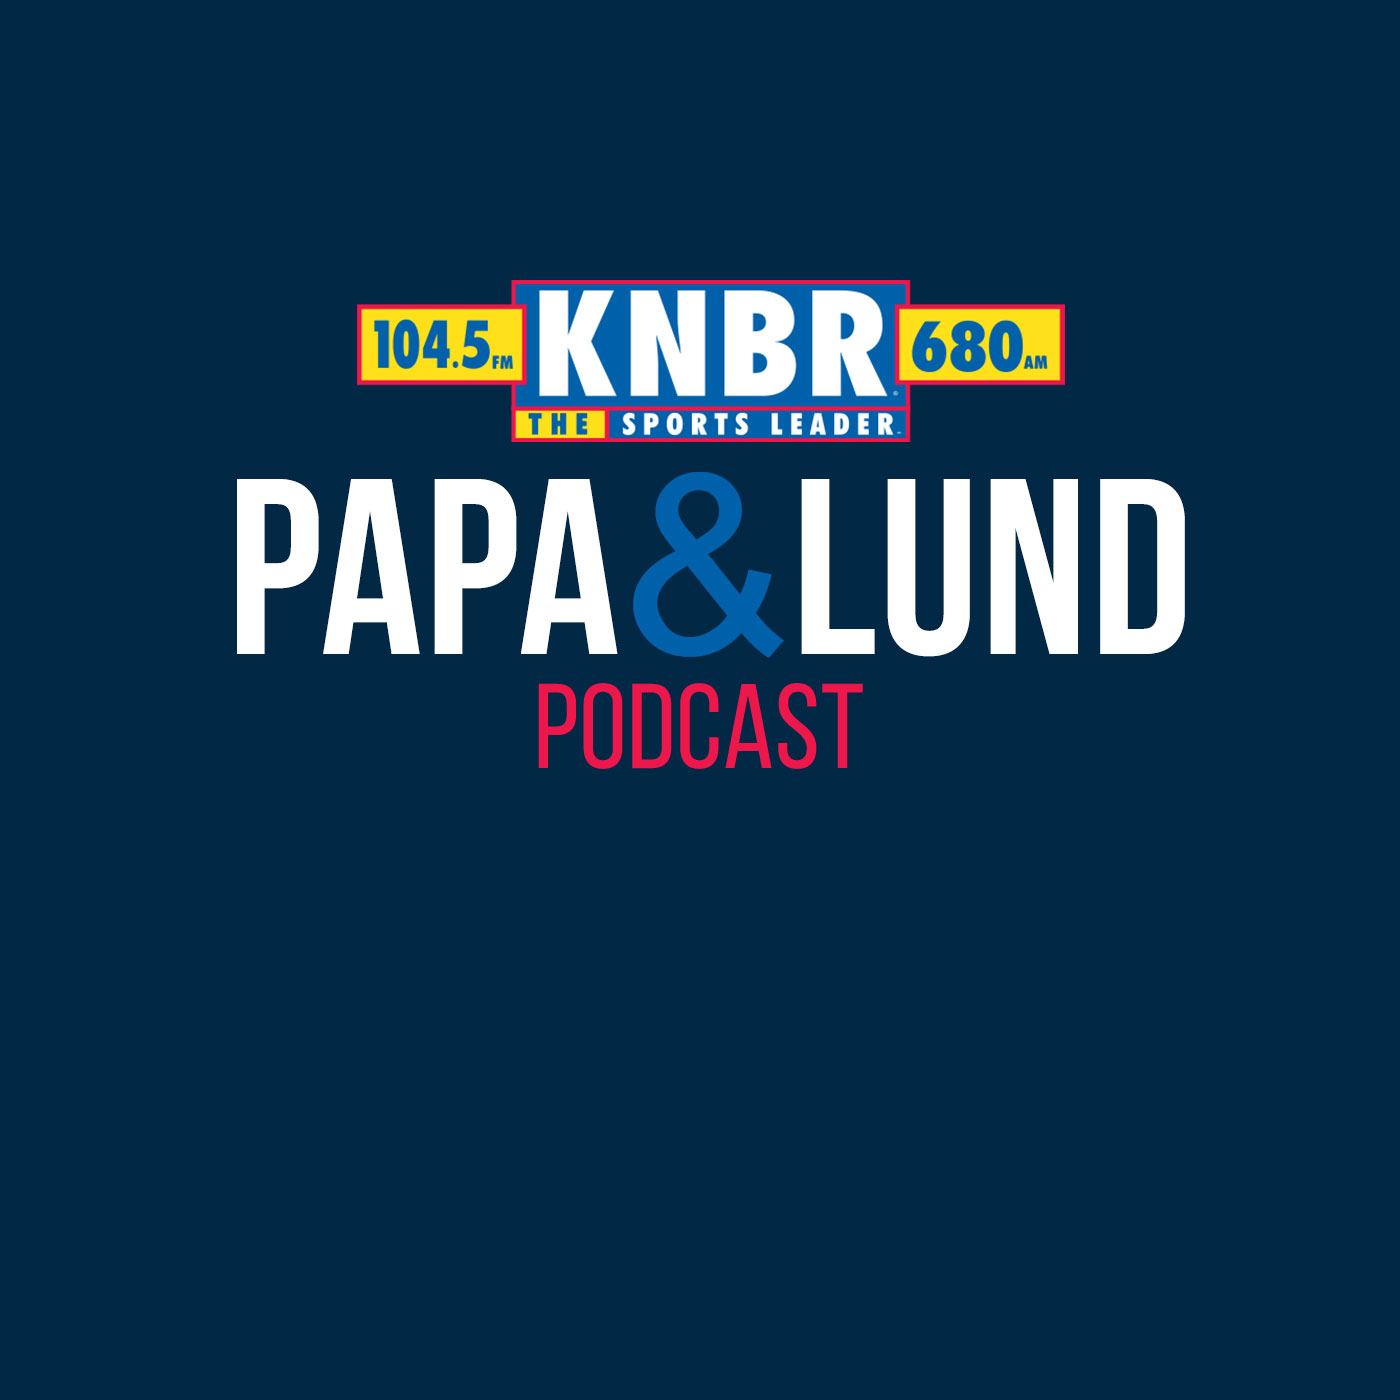 3-4 Rich Aurilia joins Papa & Lund to discuss the addition of Matt Chapman to the left side of the infield and how he reminds him of another Humm Baby on the Giants coaching staff